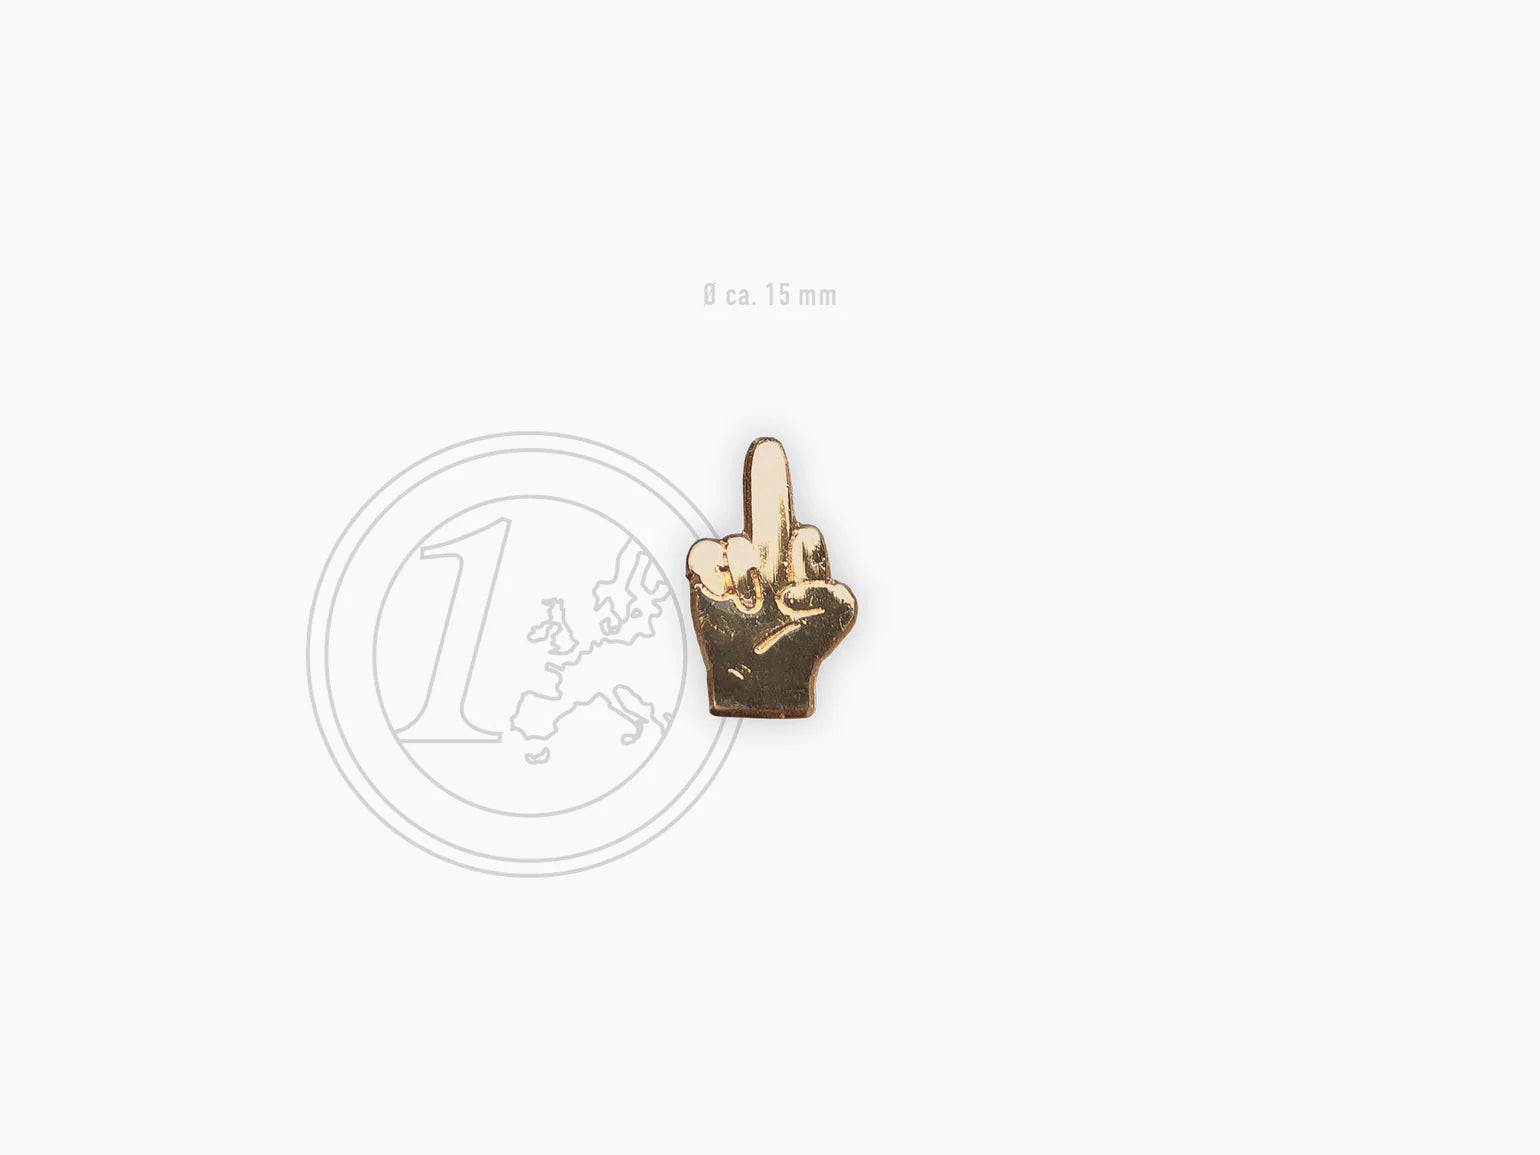 gold plated handmade the finger pin by Typealive, size comparison with euro coin